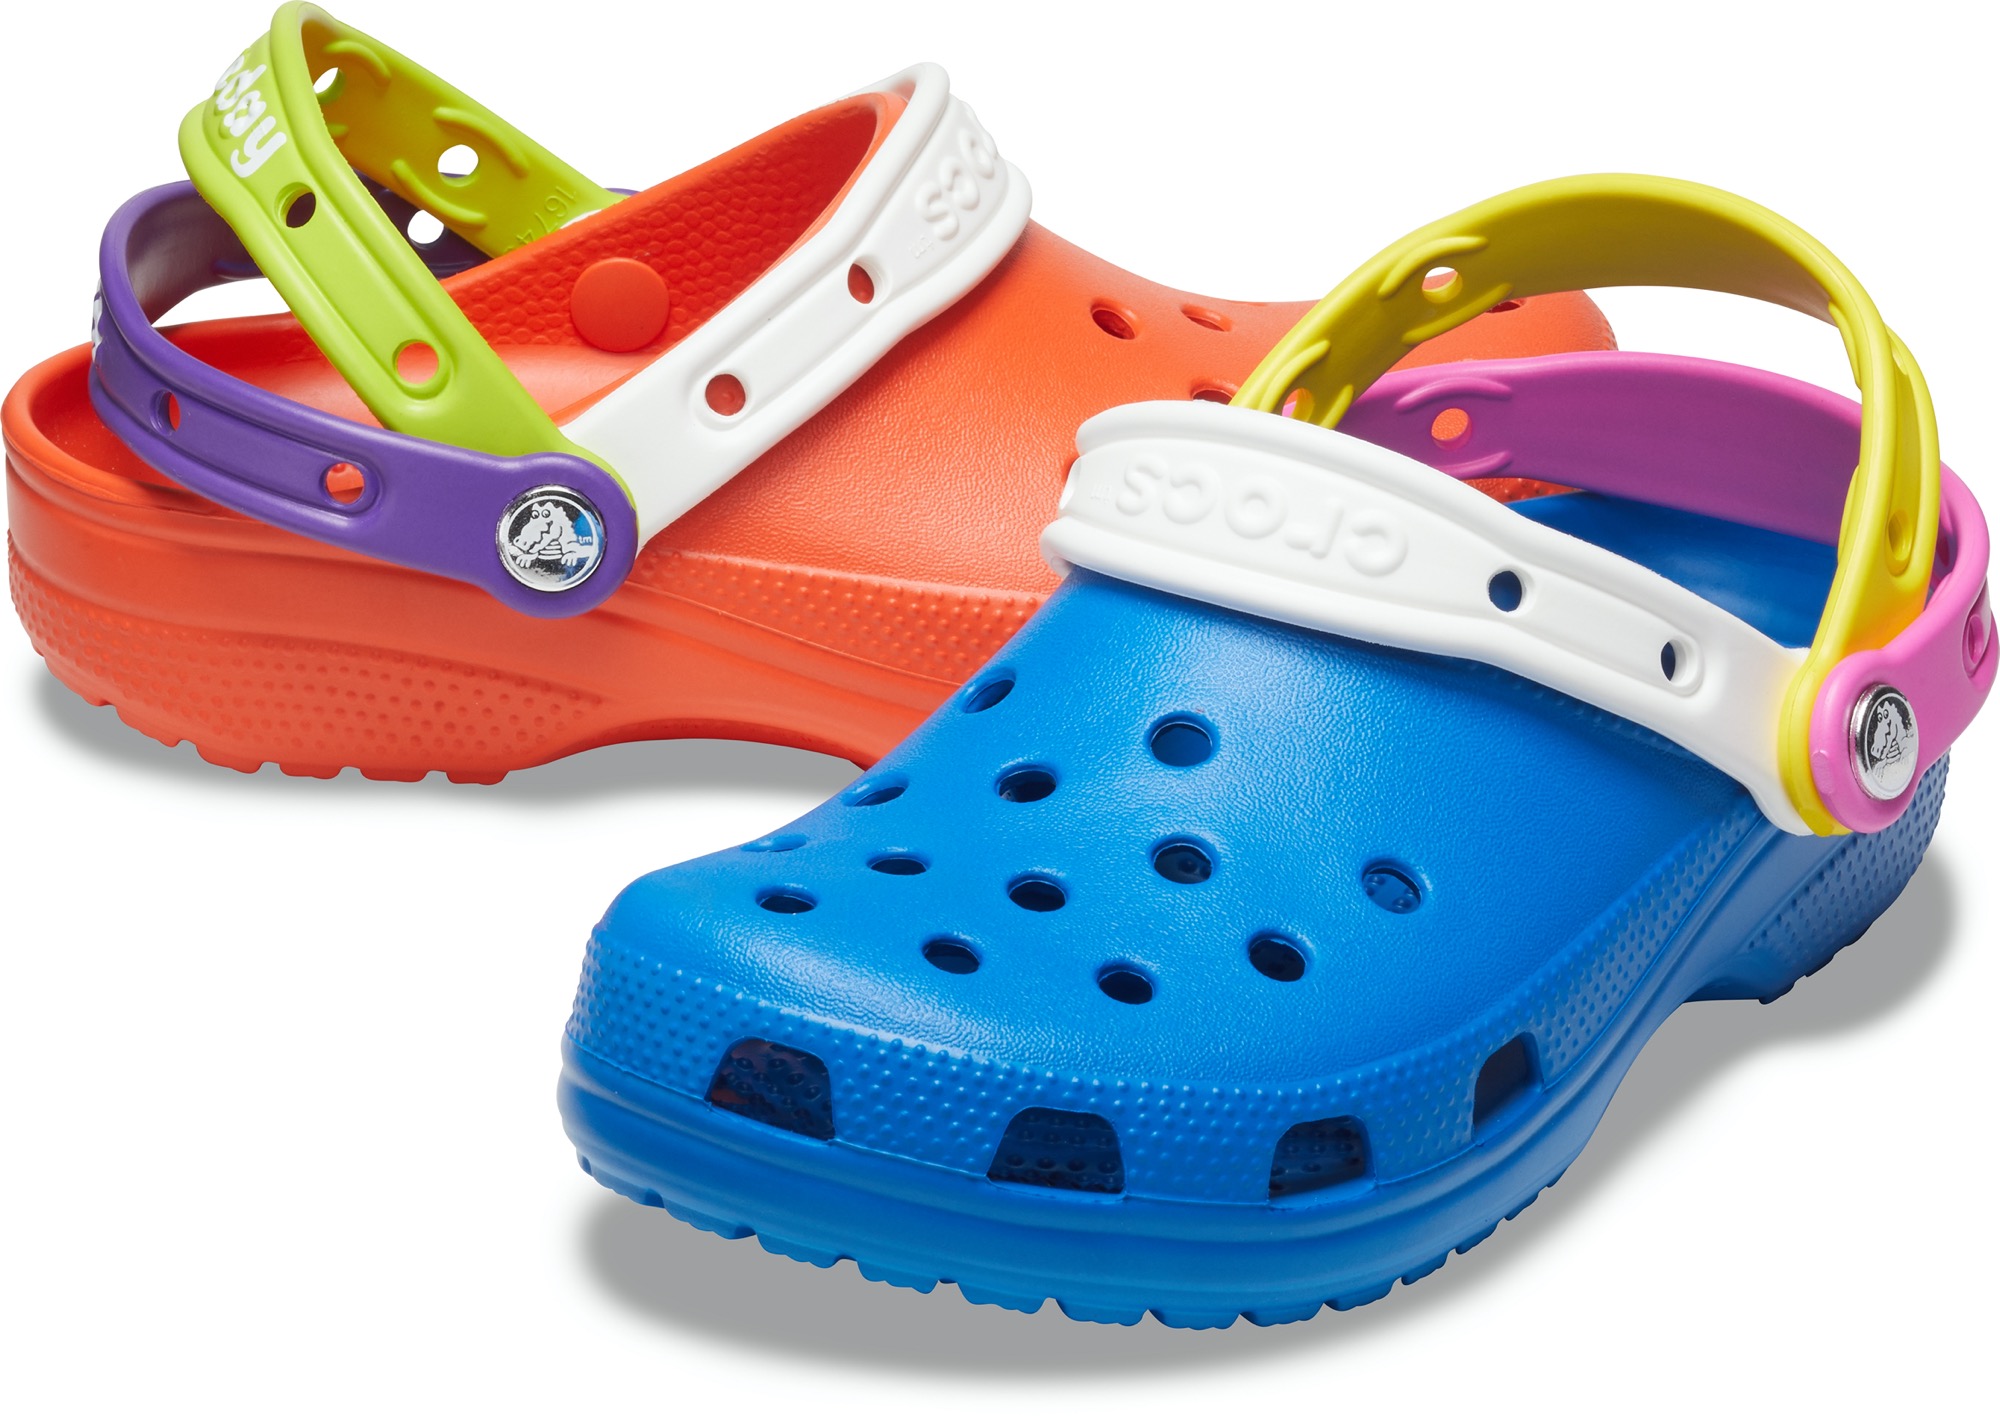 national croc day 2019